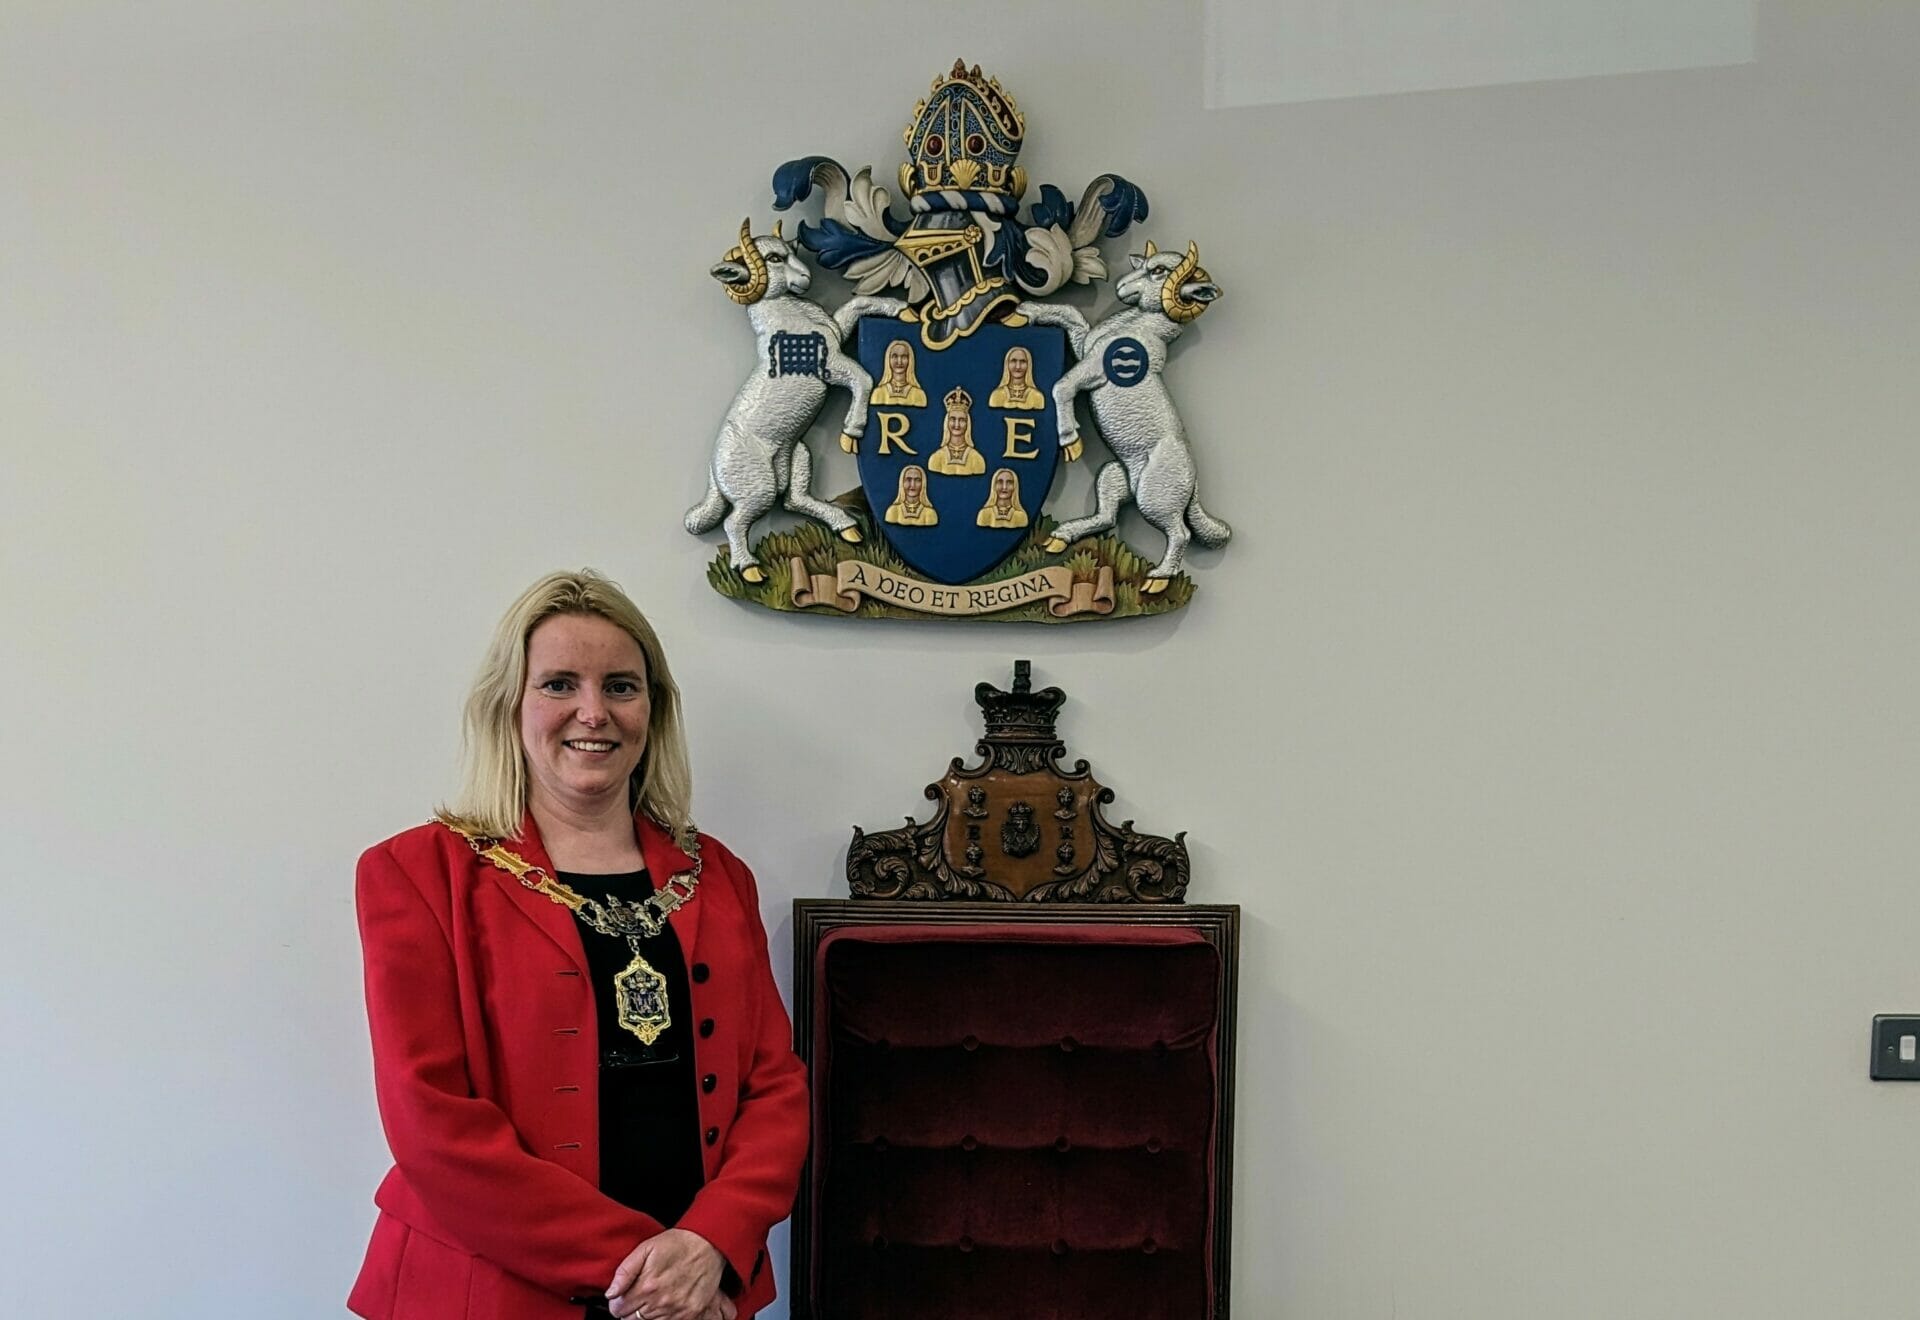 Former mayor of Reading Cllr Rachel Eden reflects on her tenure and the future of Reading – Reading Today Online